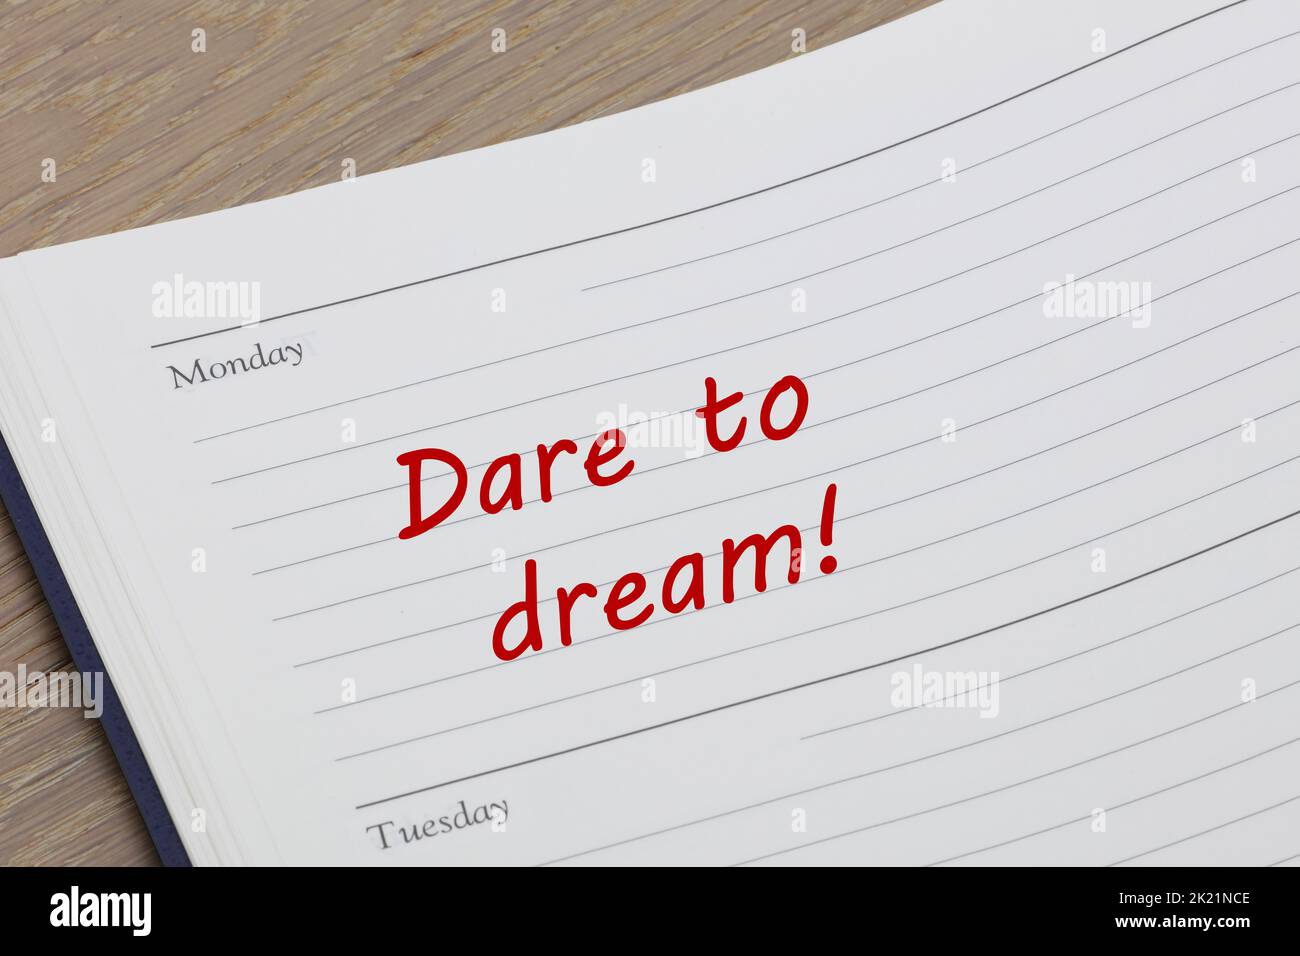 A Dare to dream diary reminder message open on desk Stock Photo